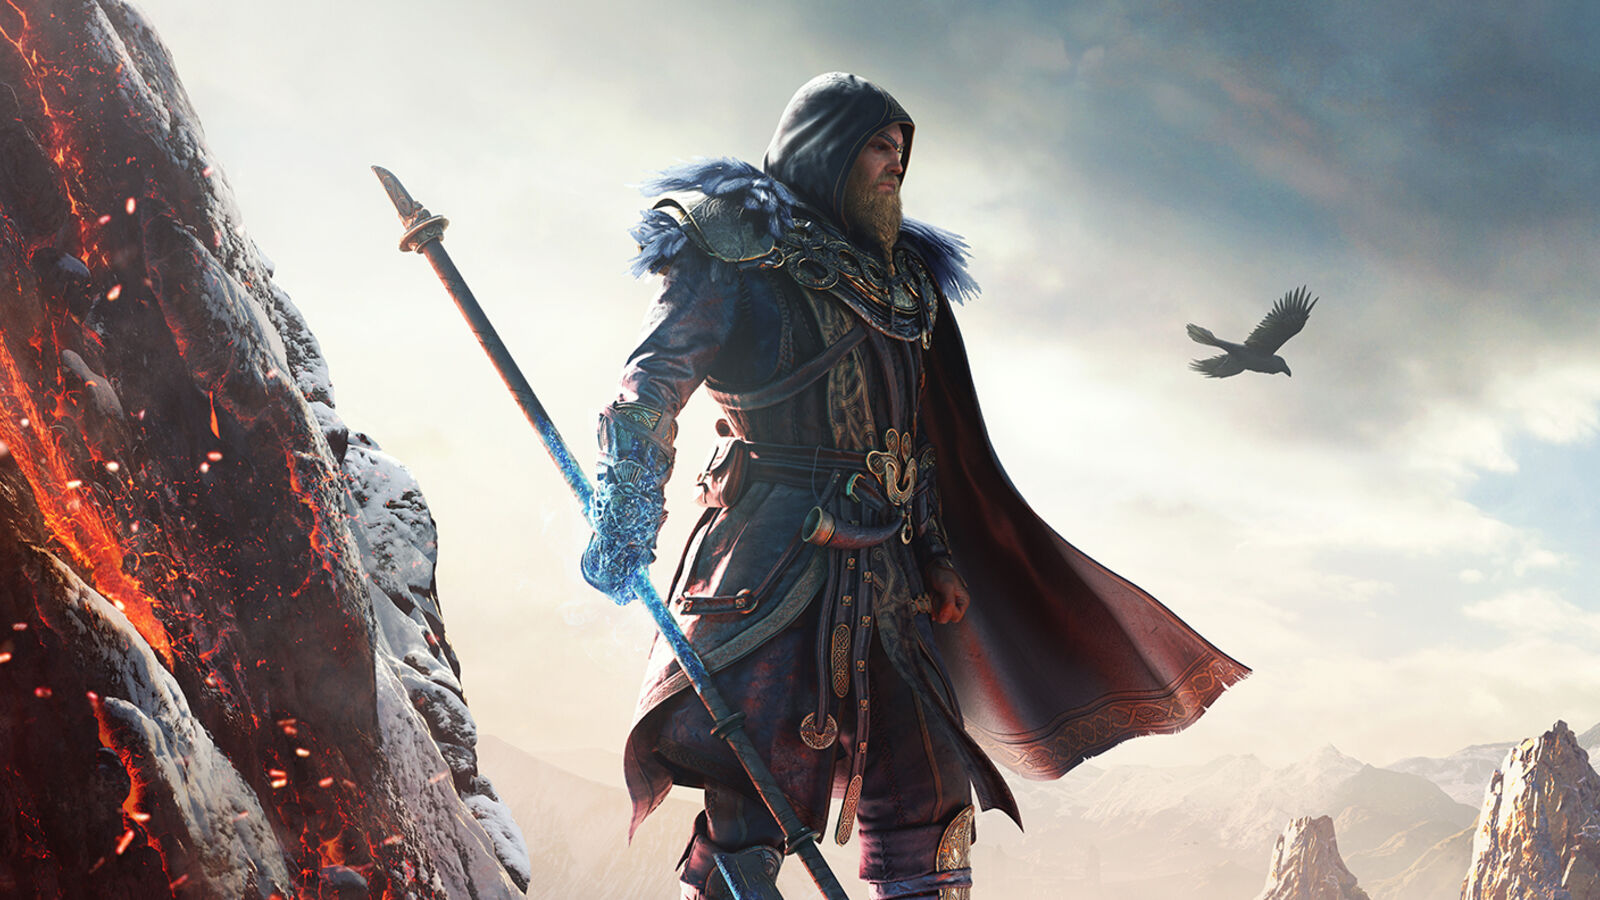 New Assassin's Creed Valhalla 2021 Wallpapers